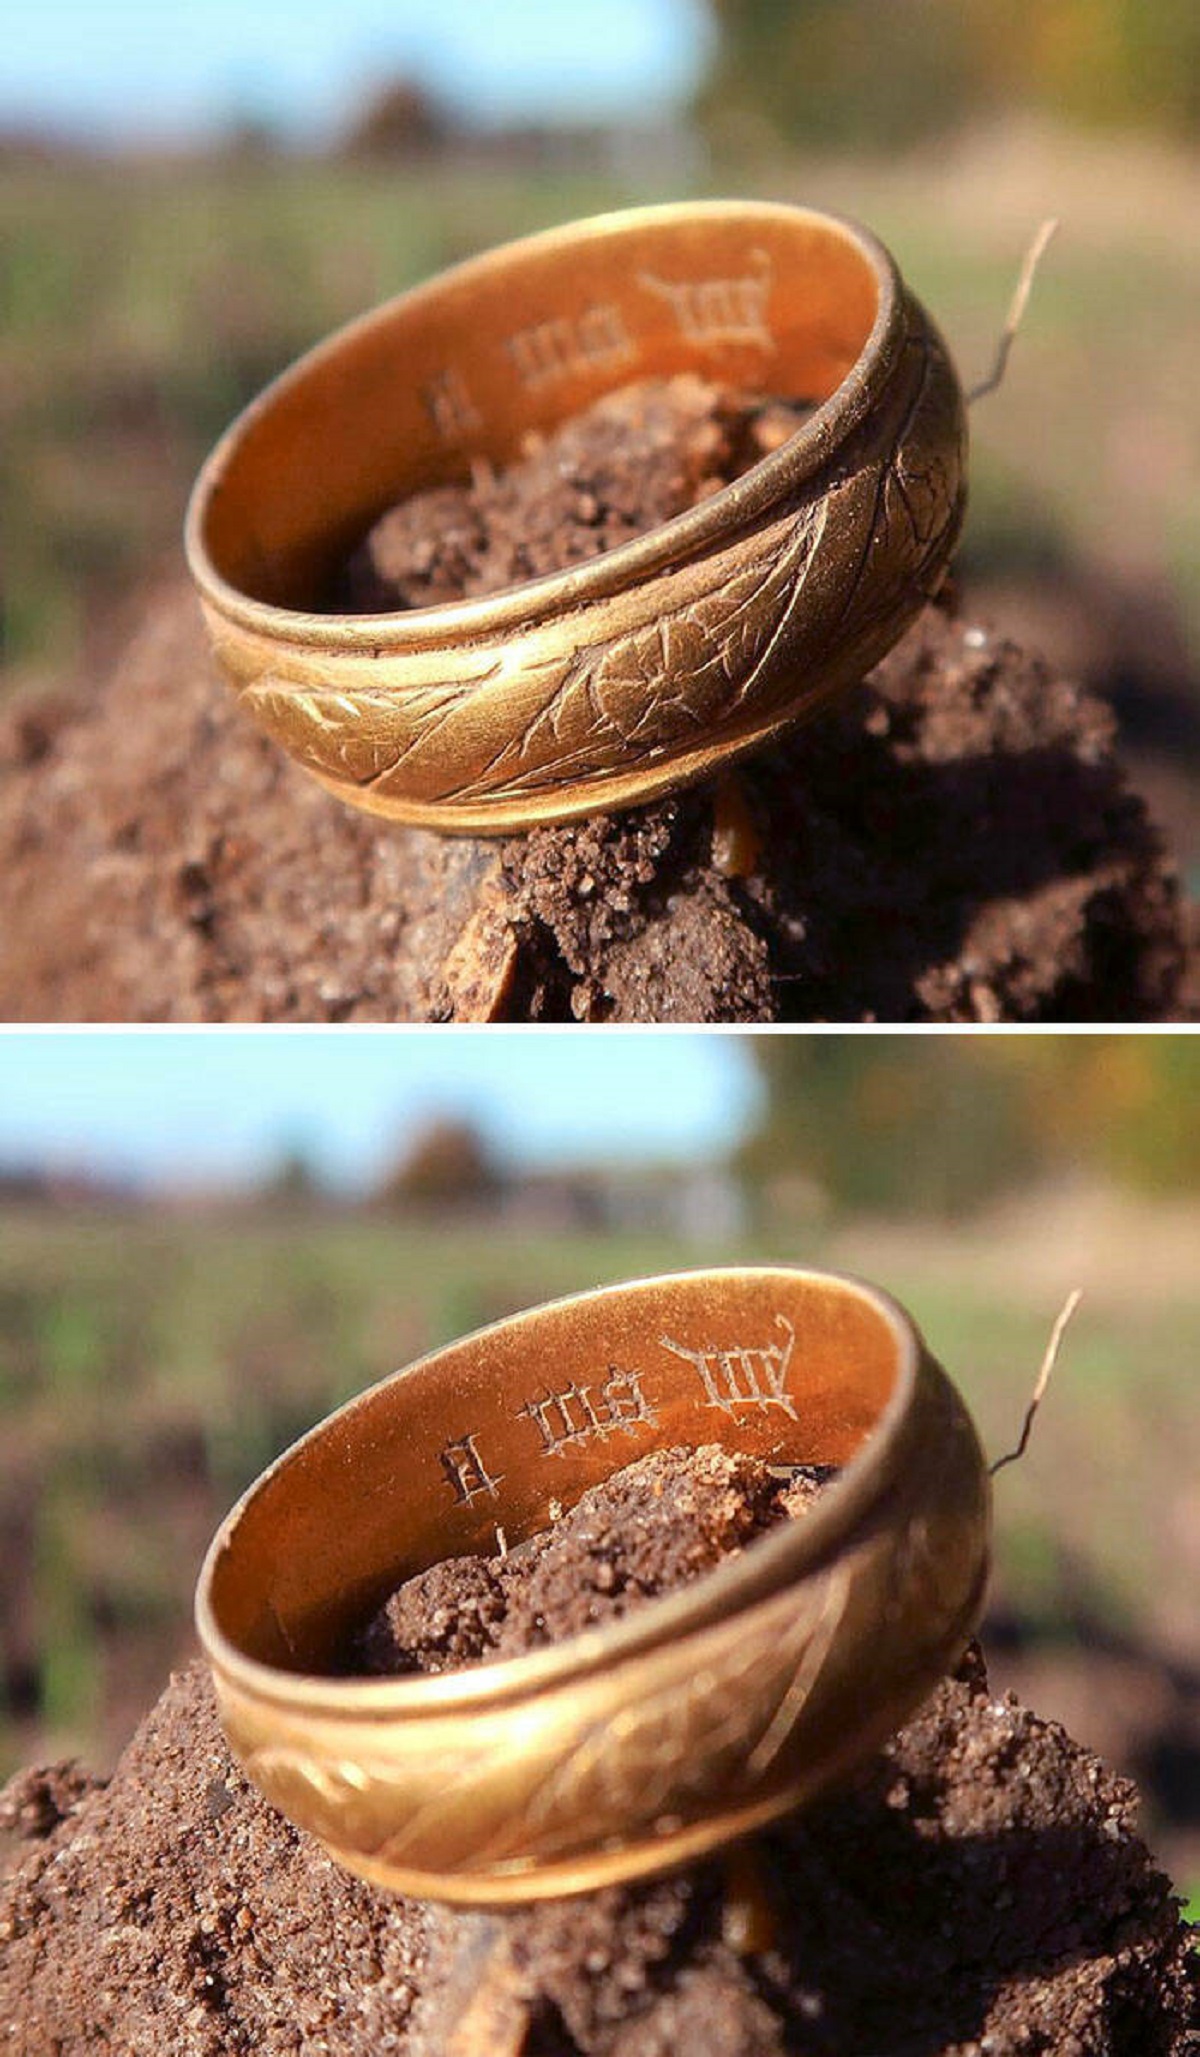 "Medieval Gold Ring I Just Found"